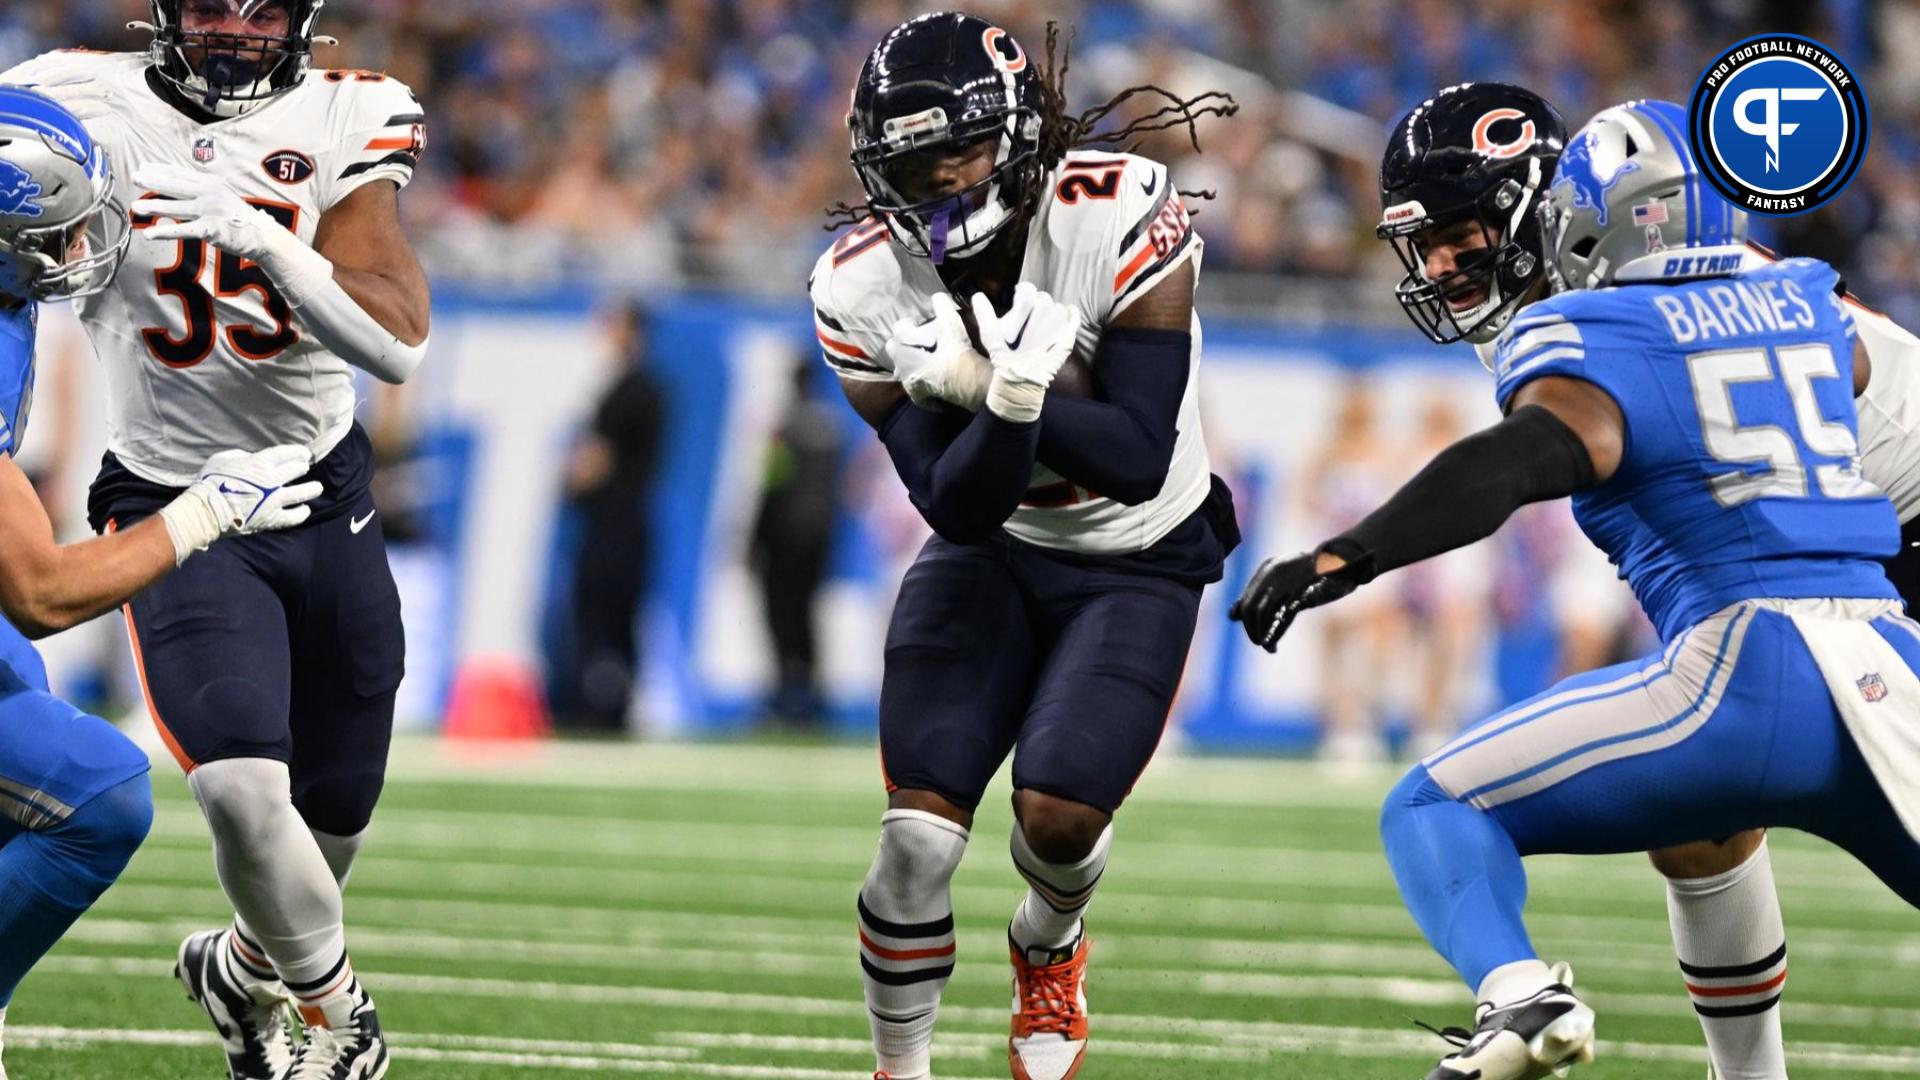 Chicago Bears running back D'Onta Foreman (21) runs the ball against the Detroit Lions in the first quarter at Ford Field.